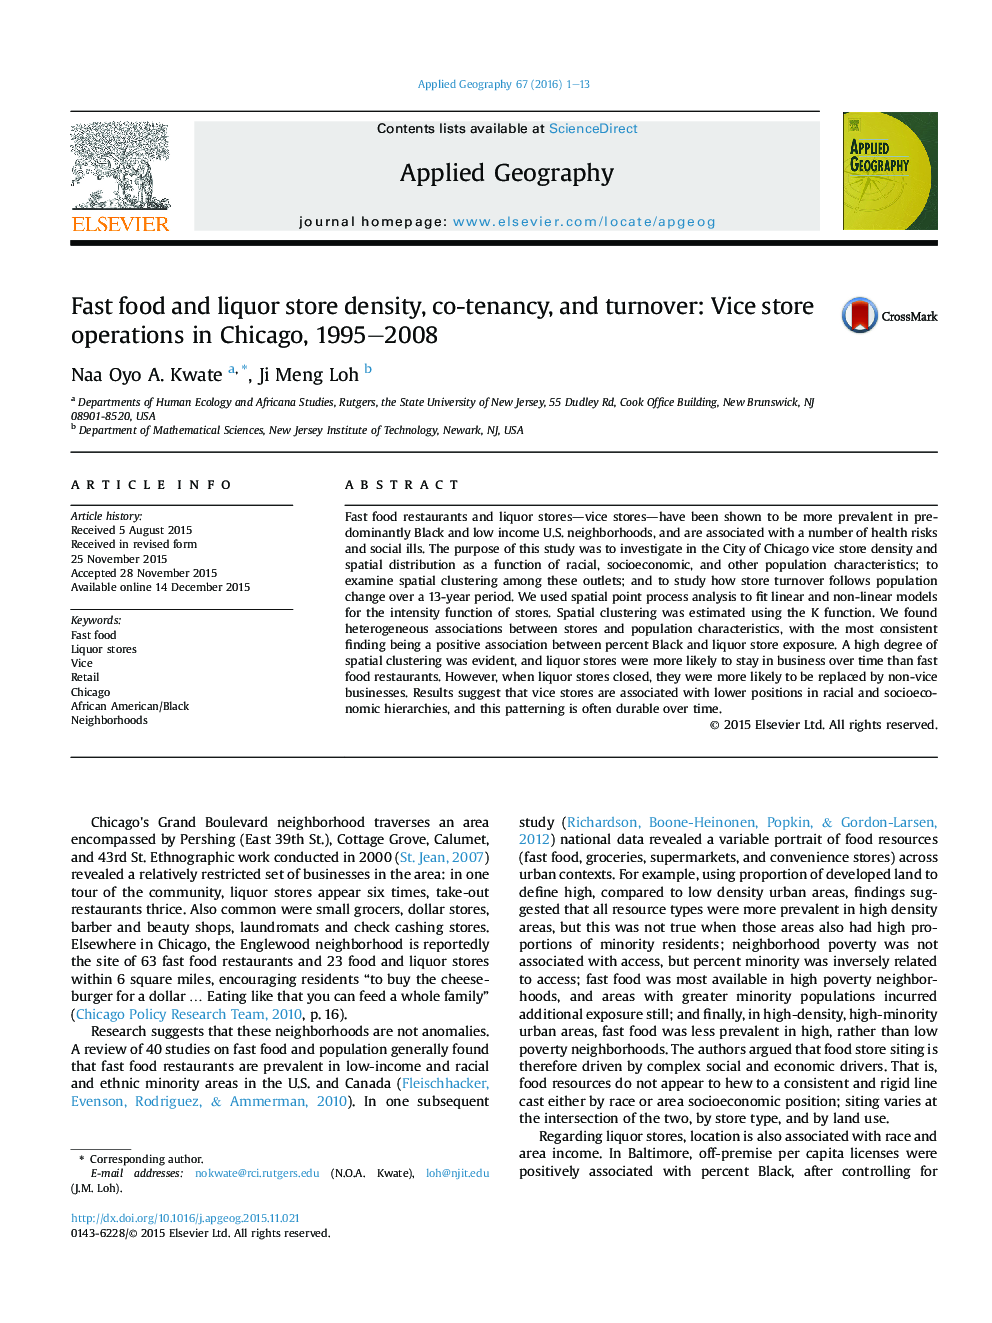 Fast food and liquor store density, co-tenancy, and turnover: Vice store operations in Chicago, 1995–2008